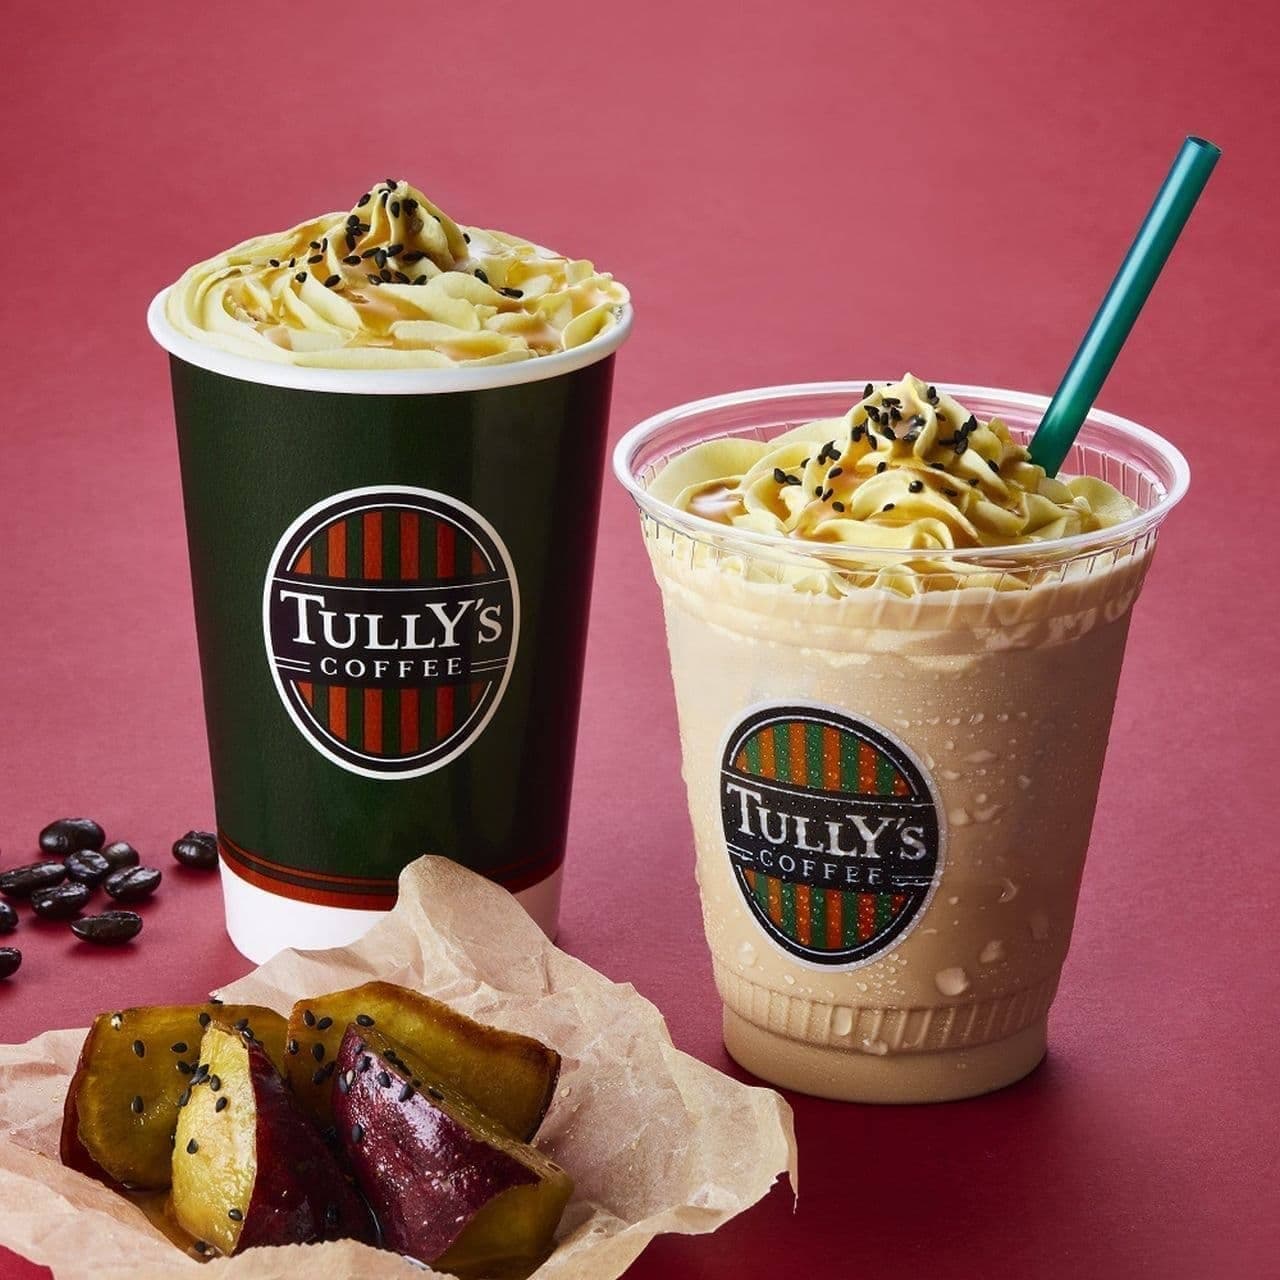 Tully's Coffee "Dusty OIMO Latte